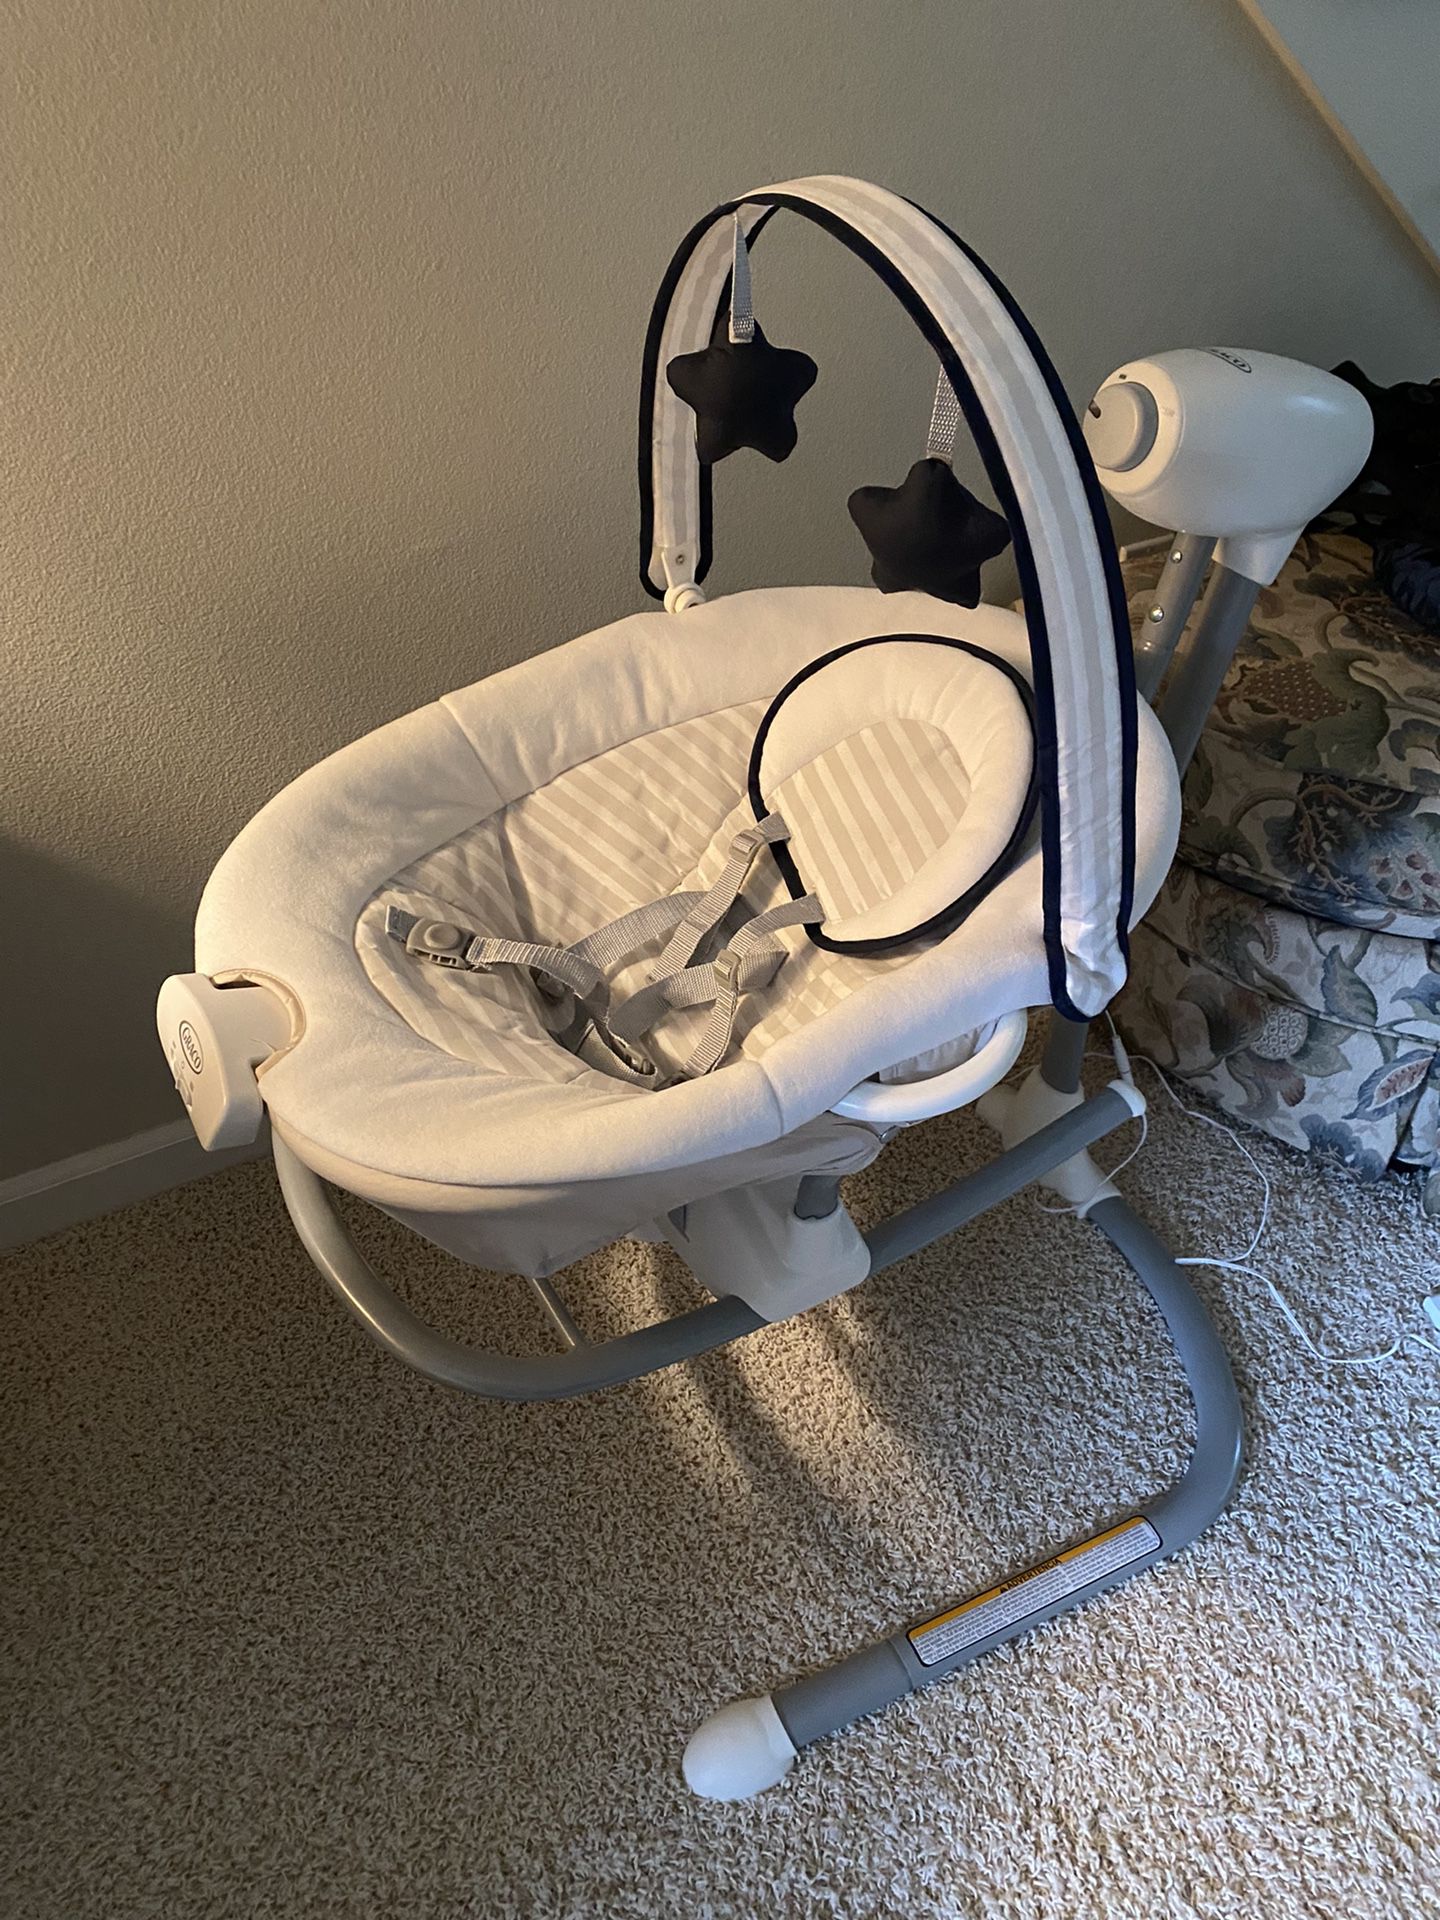 Graco Soothe And Sway Baby Swing